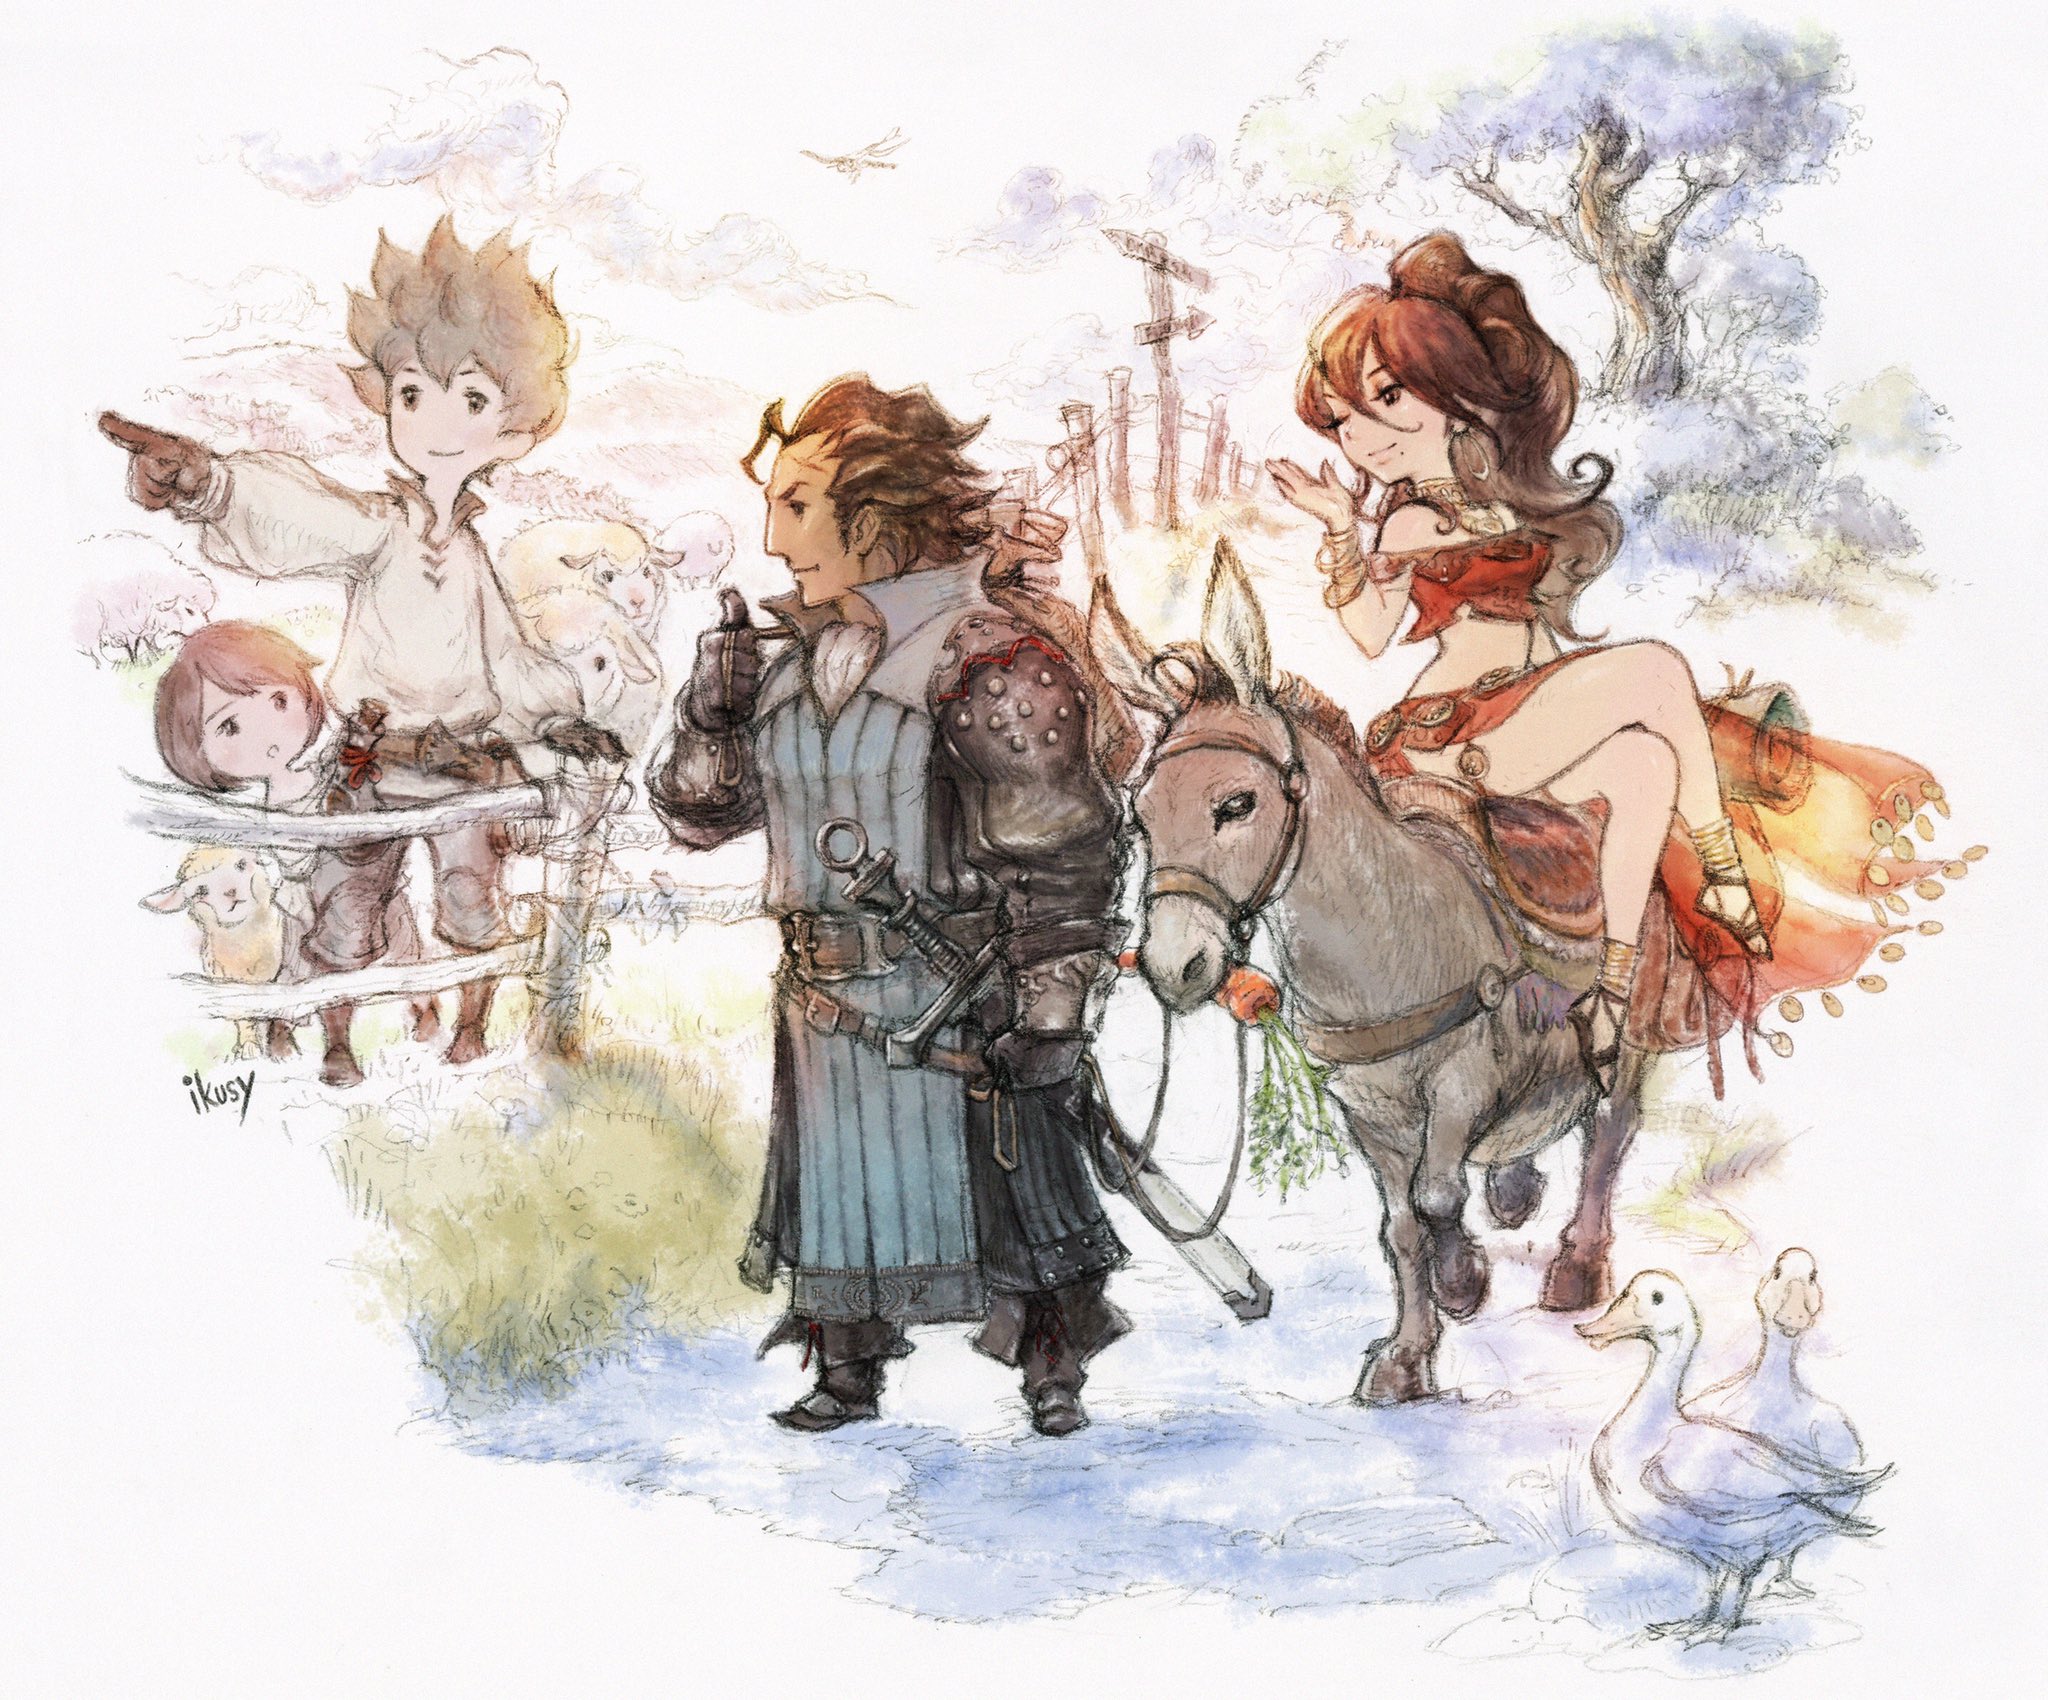 Project Octopath Traveler